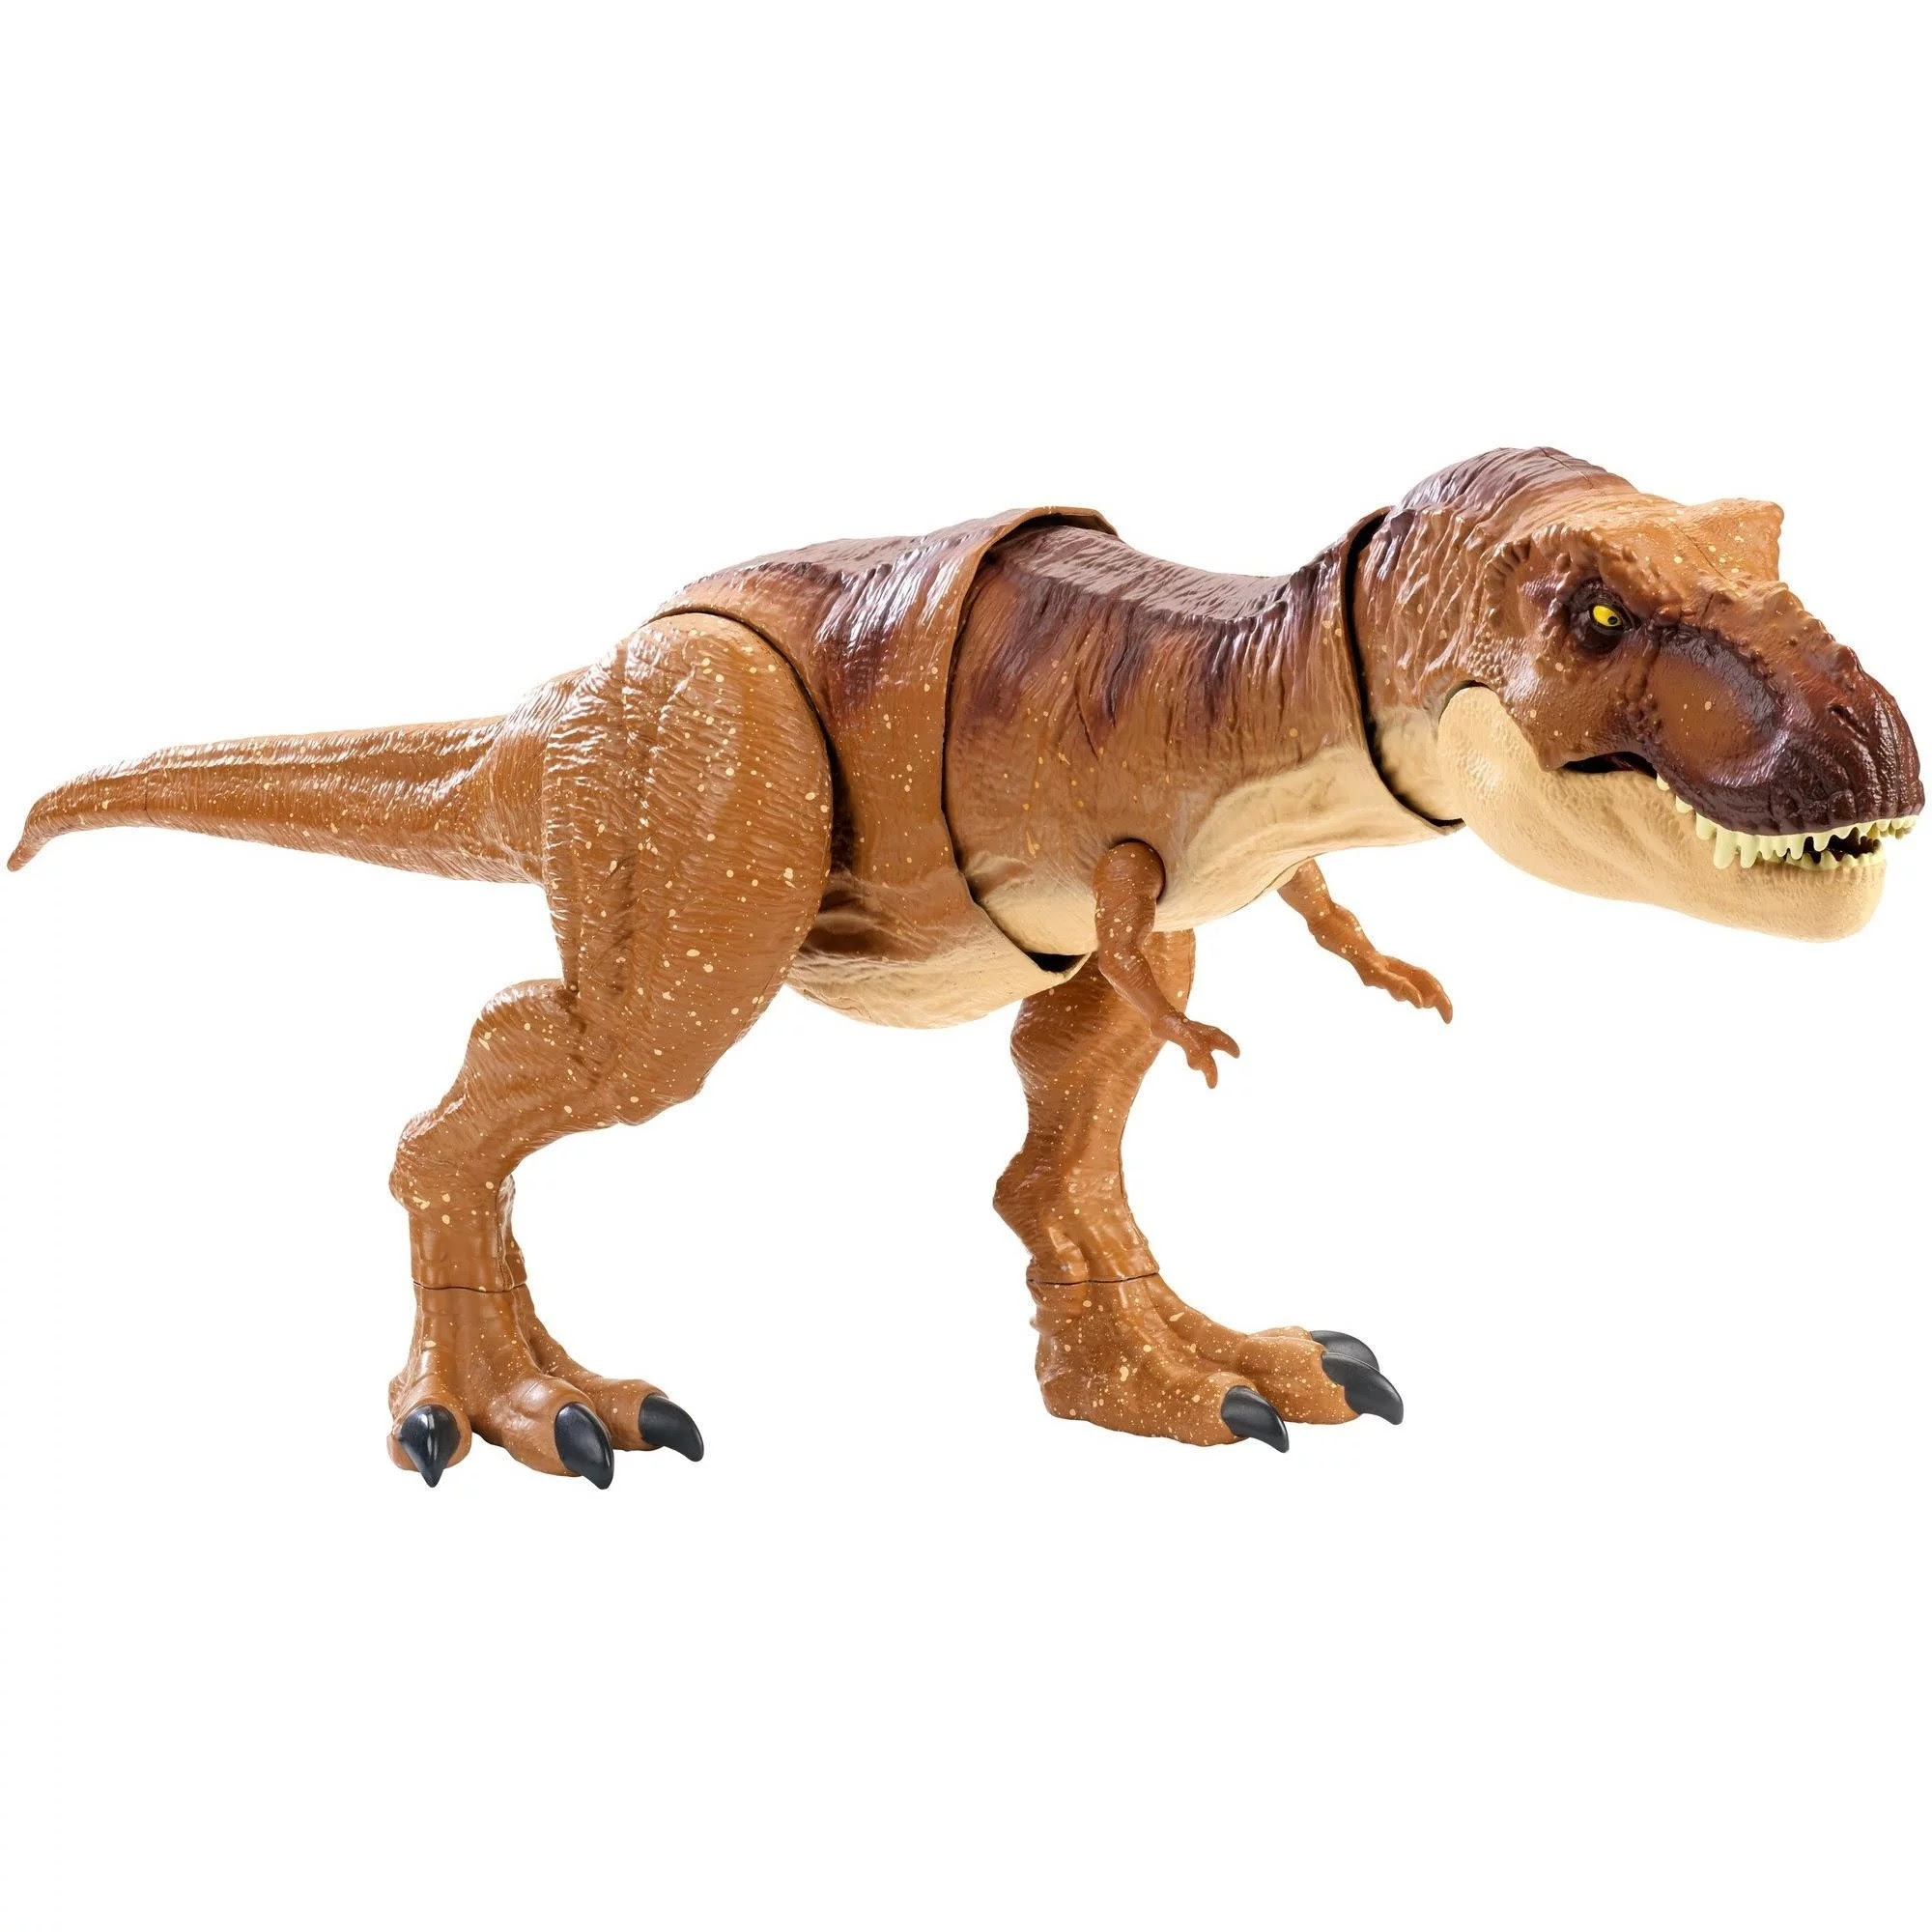 So, whether you're a fan of the jurassic park films or a budding scientist working on your palaeontology skills, these lego builds will provide hours of fun. Jurassic World Thrash 'n Throw Tyrannosaurus Rex Dinosaur Figure